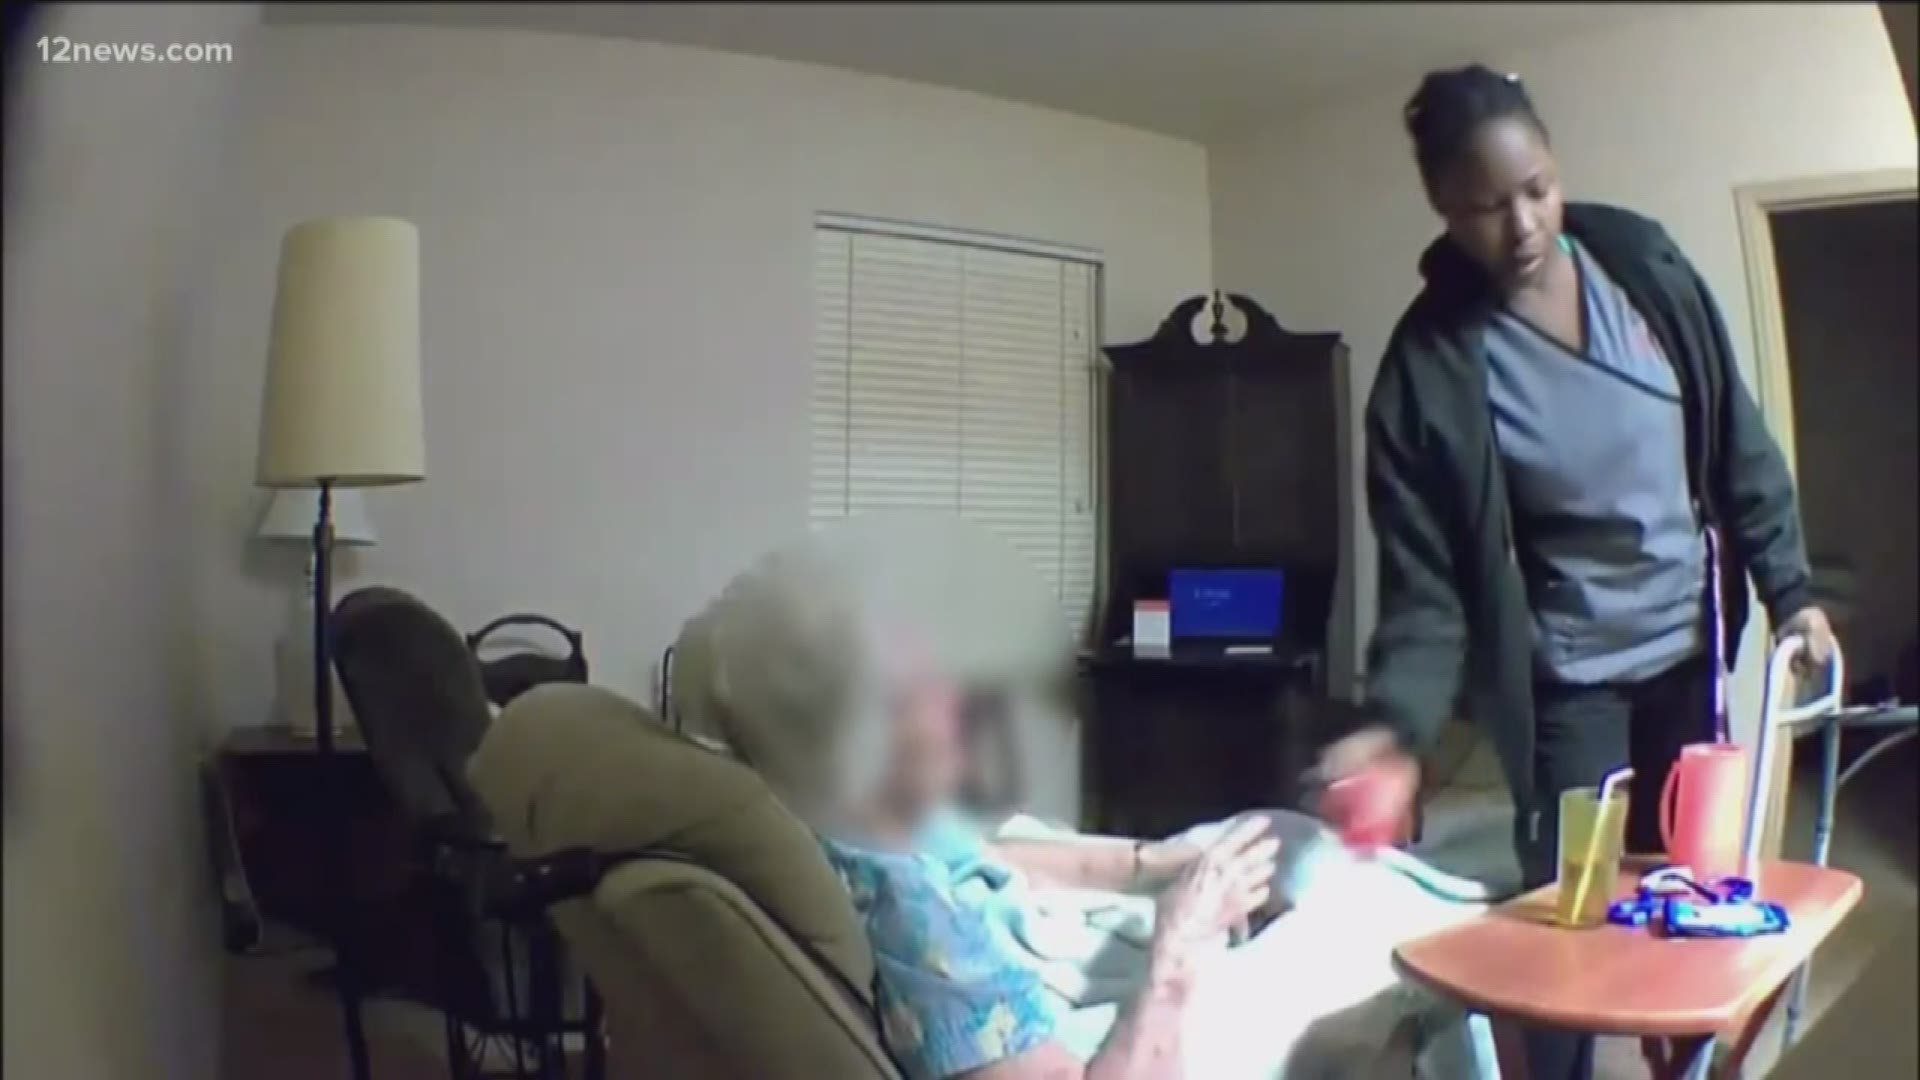 A caretaker was arrested after video shows her hitting a 96-year-old woman. The woman is a resident at a nursing facility.